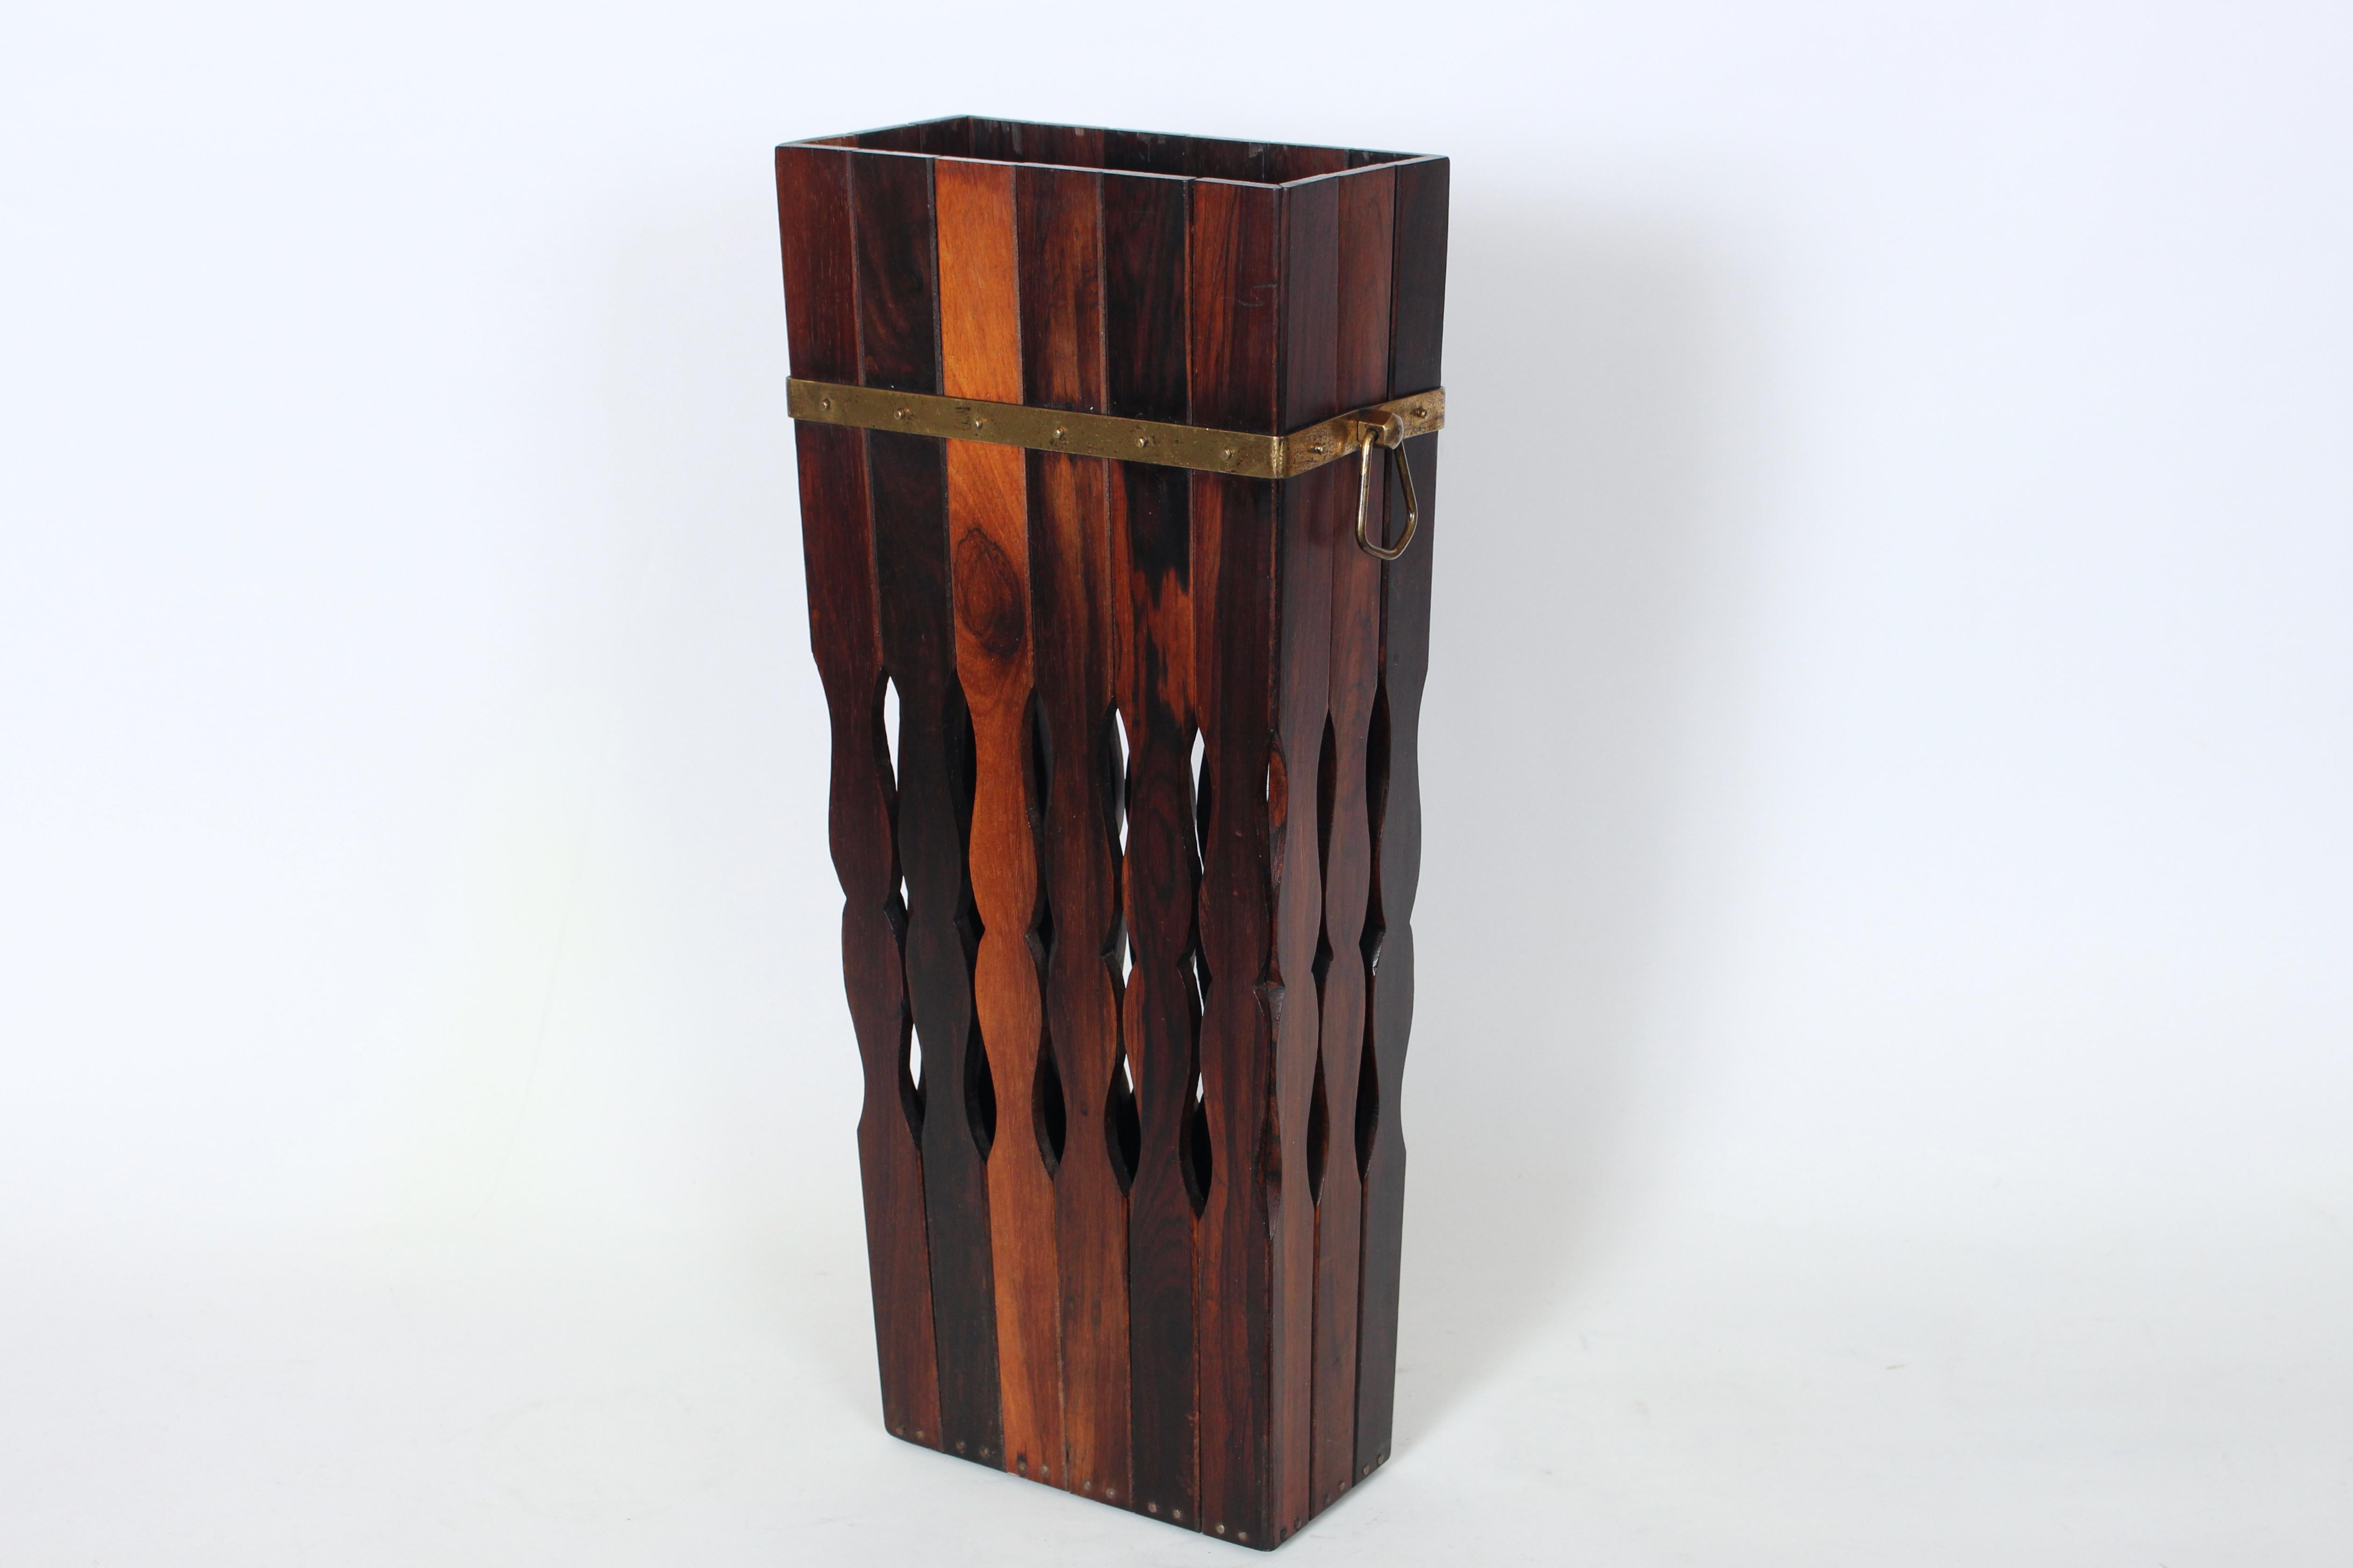 Modern Brazilian Rosewood Umbrella Stand, Cane Stand, Circa 1970 In Good Condition For Sale In Bainbridge, NY